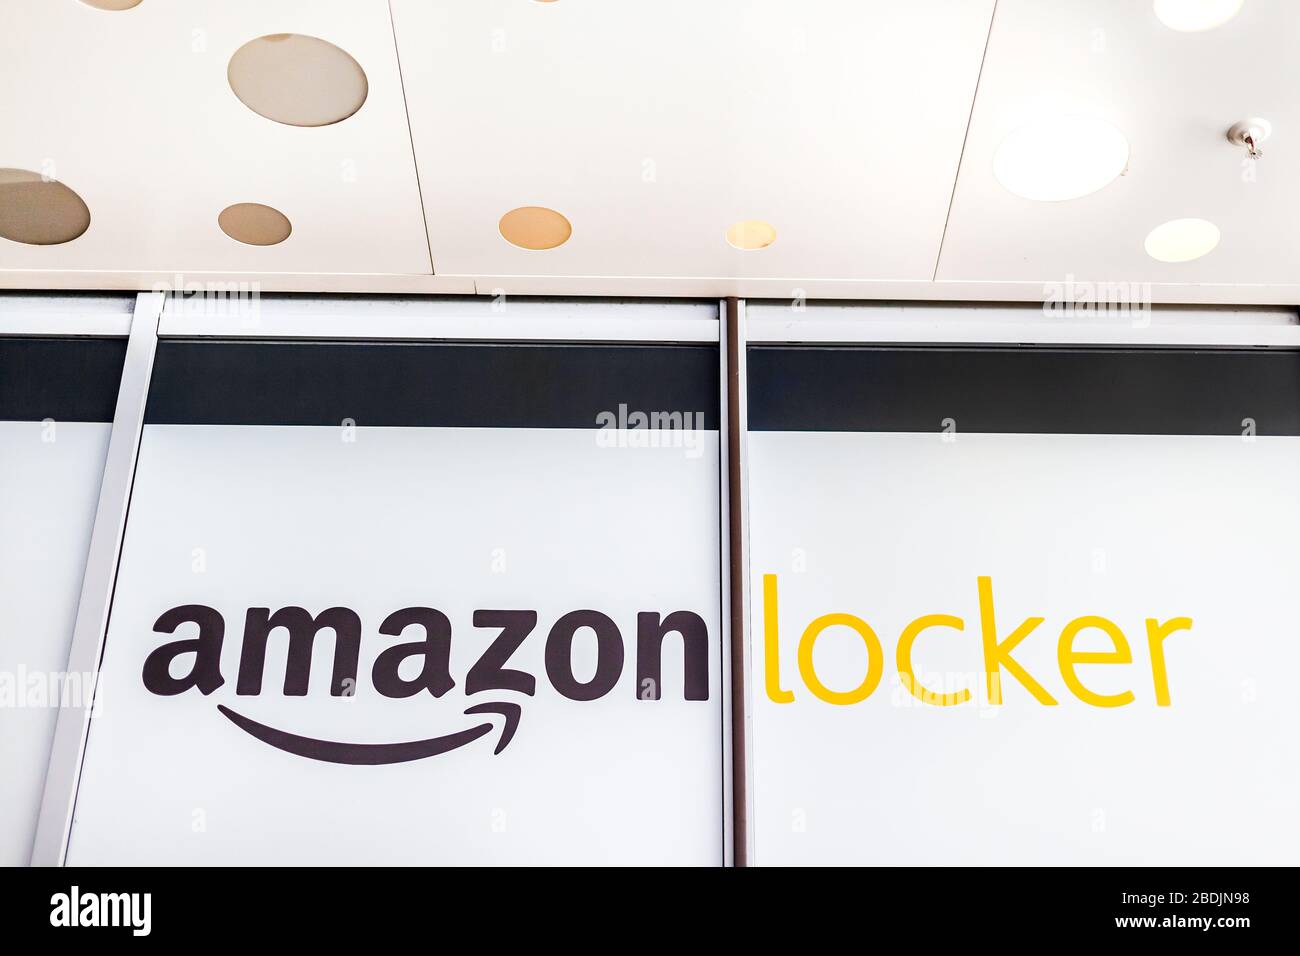 Amazon Locker in shopping mall, brand logo on pick up point for mail order goods. Lyon, France - February 23, 2020 Stock Photo